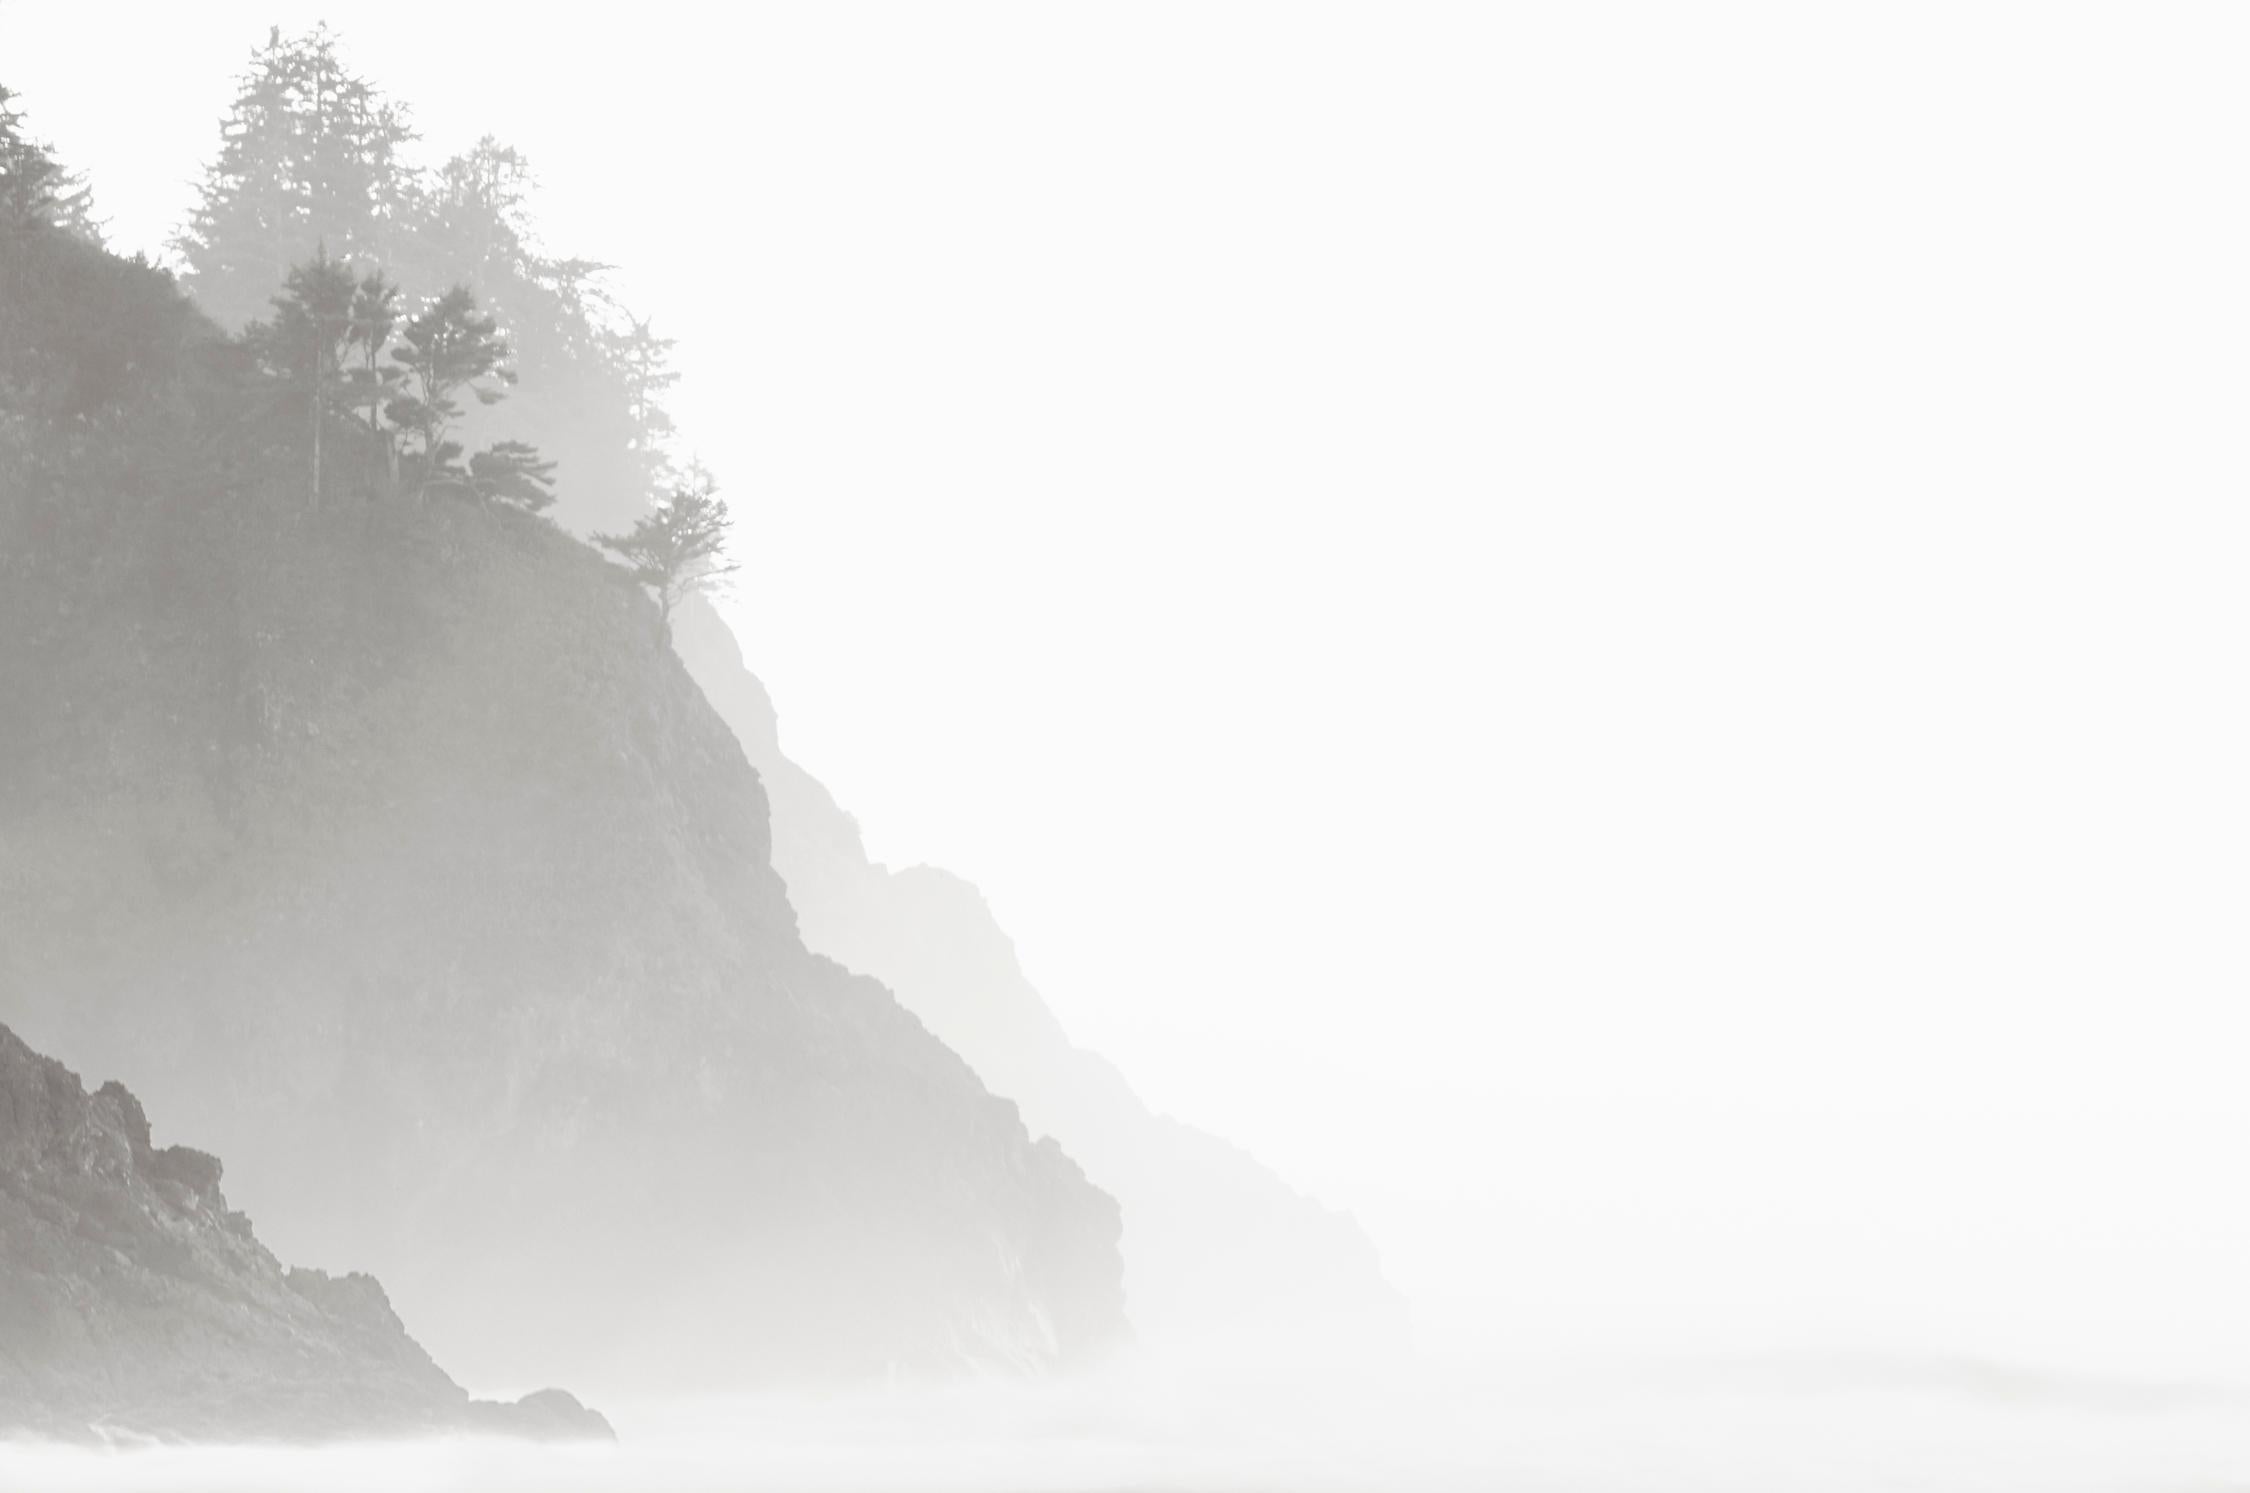 Drew Doggett Black and White Photograph - Ethereal Morning on the Coast of California, Bestseller, Black and White Print